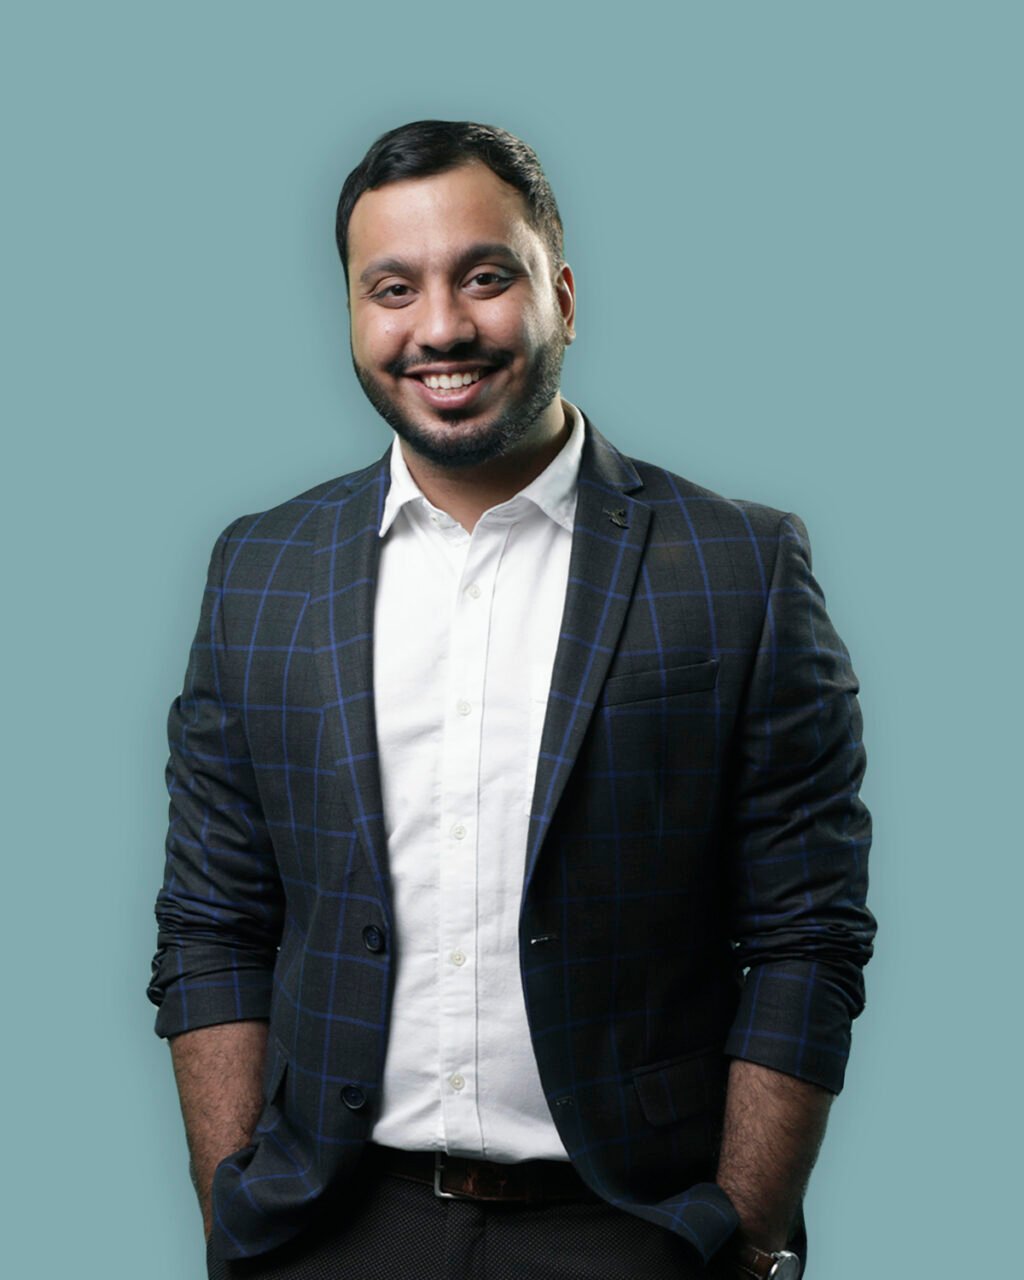 Mohammed Zeeshan, CEO and Co-Founder of MyCaptain